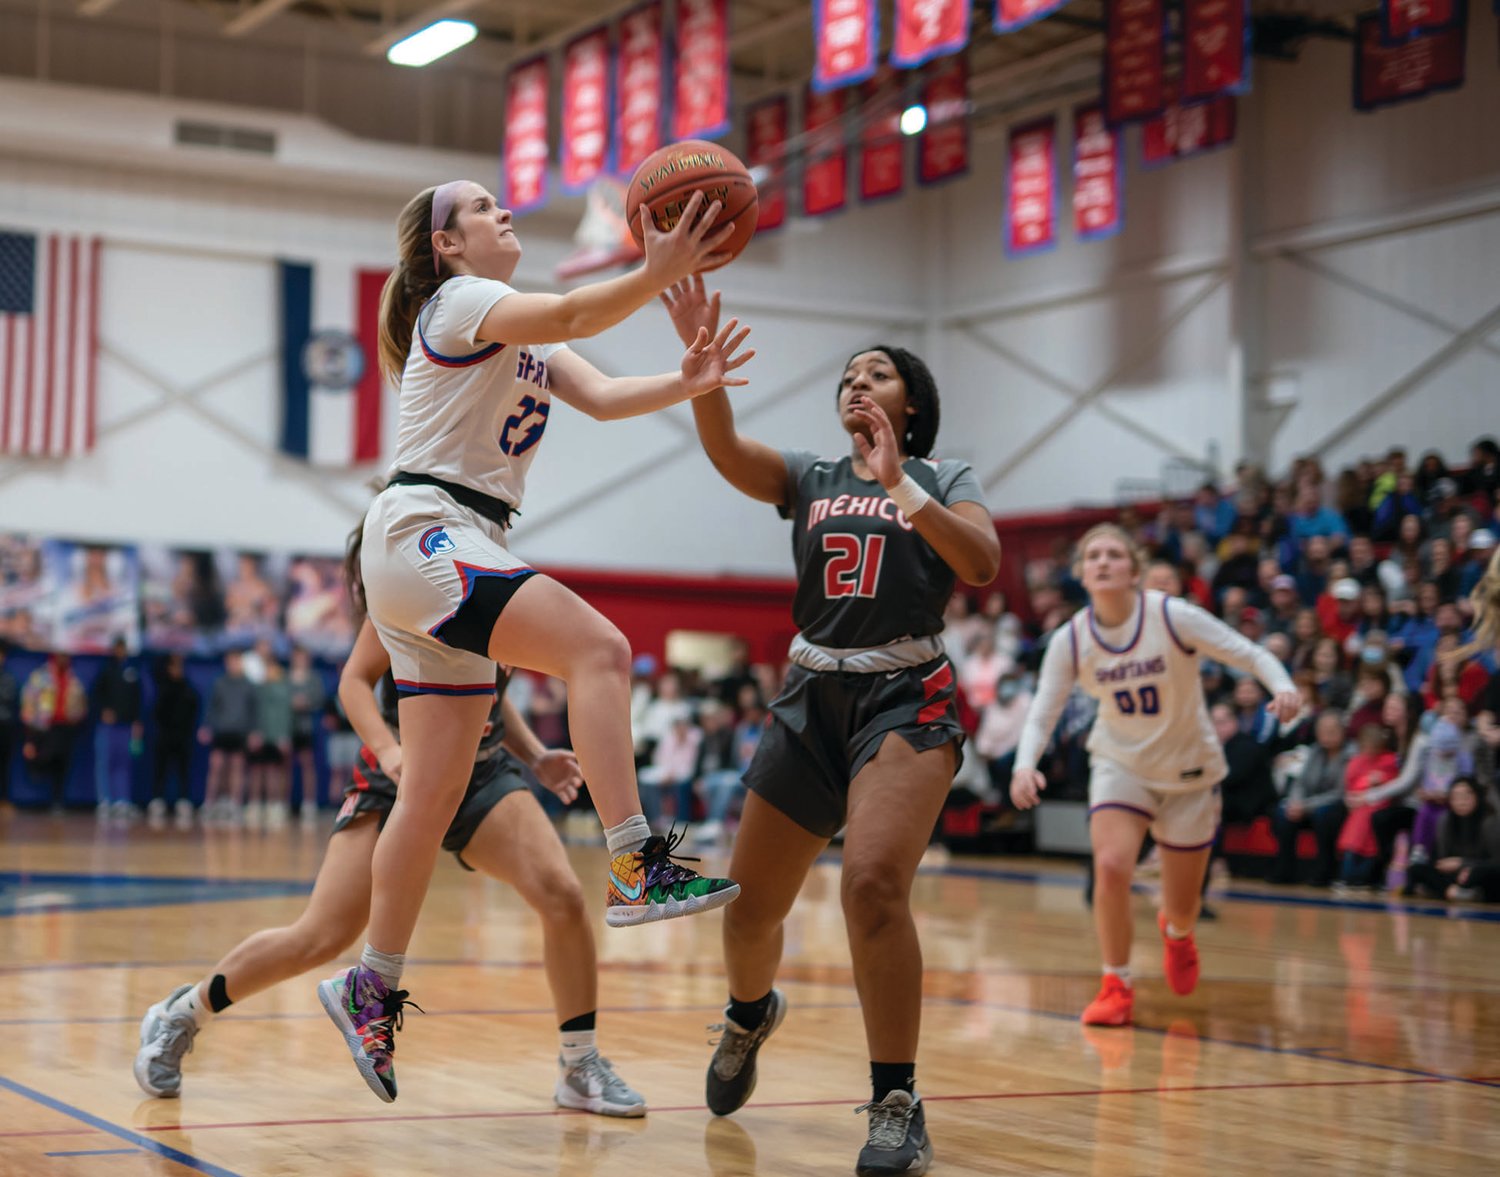 Moberly’s Kennedy Messer glides in for a layup in front of Mexico’s Capri’ona Fountain in last Thursday’s conference contest. Messer had 10 points in the 67-45 win at home. (John Wright Photography)